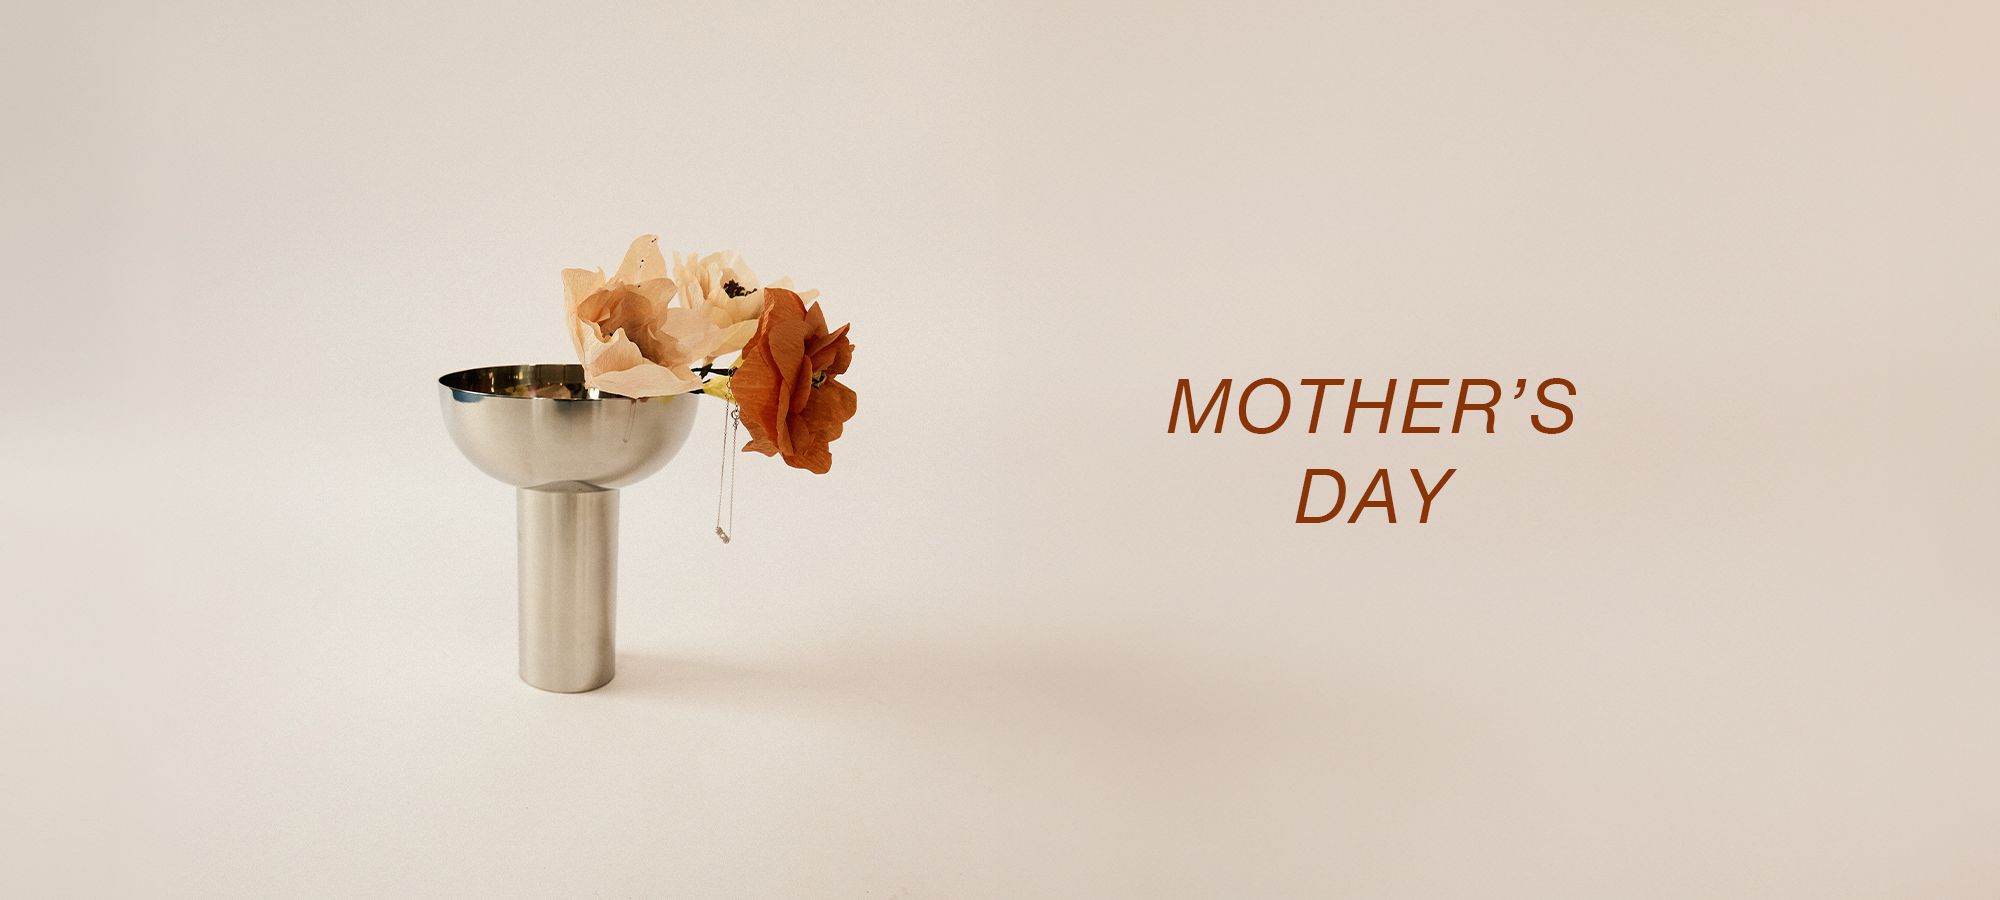 Mother's Day at Byflou.com